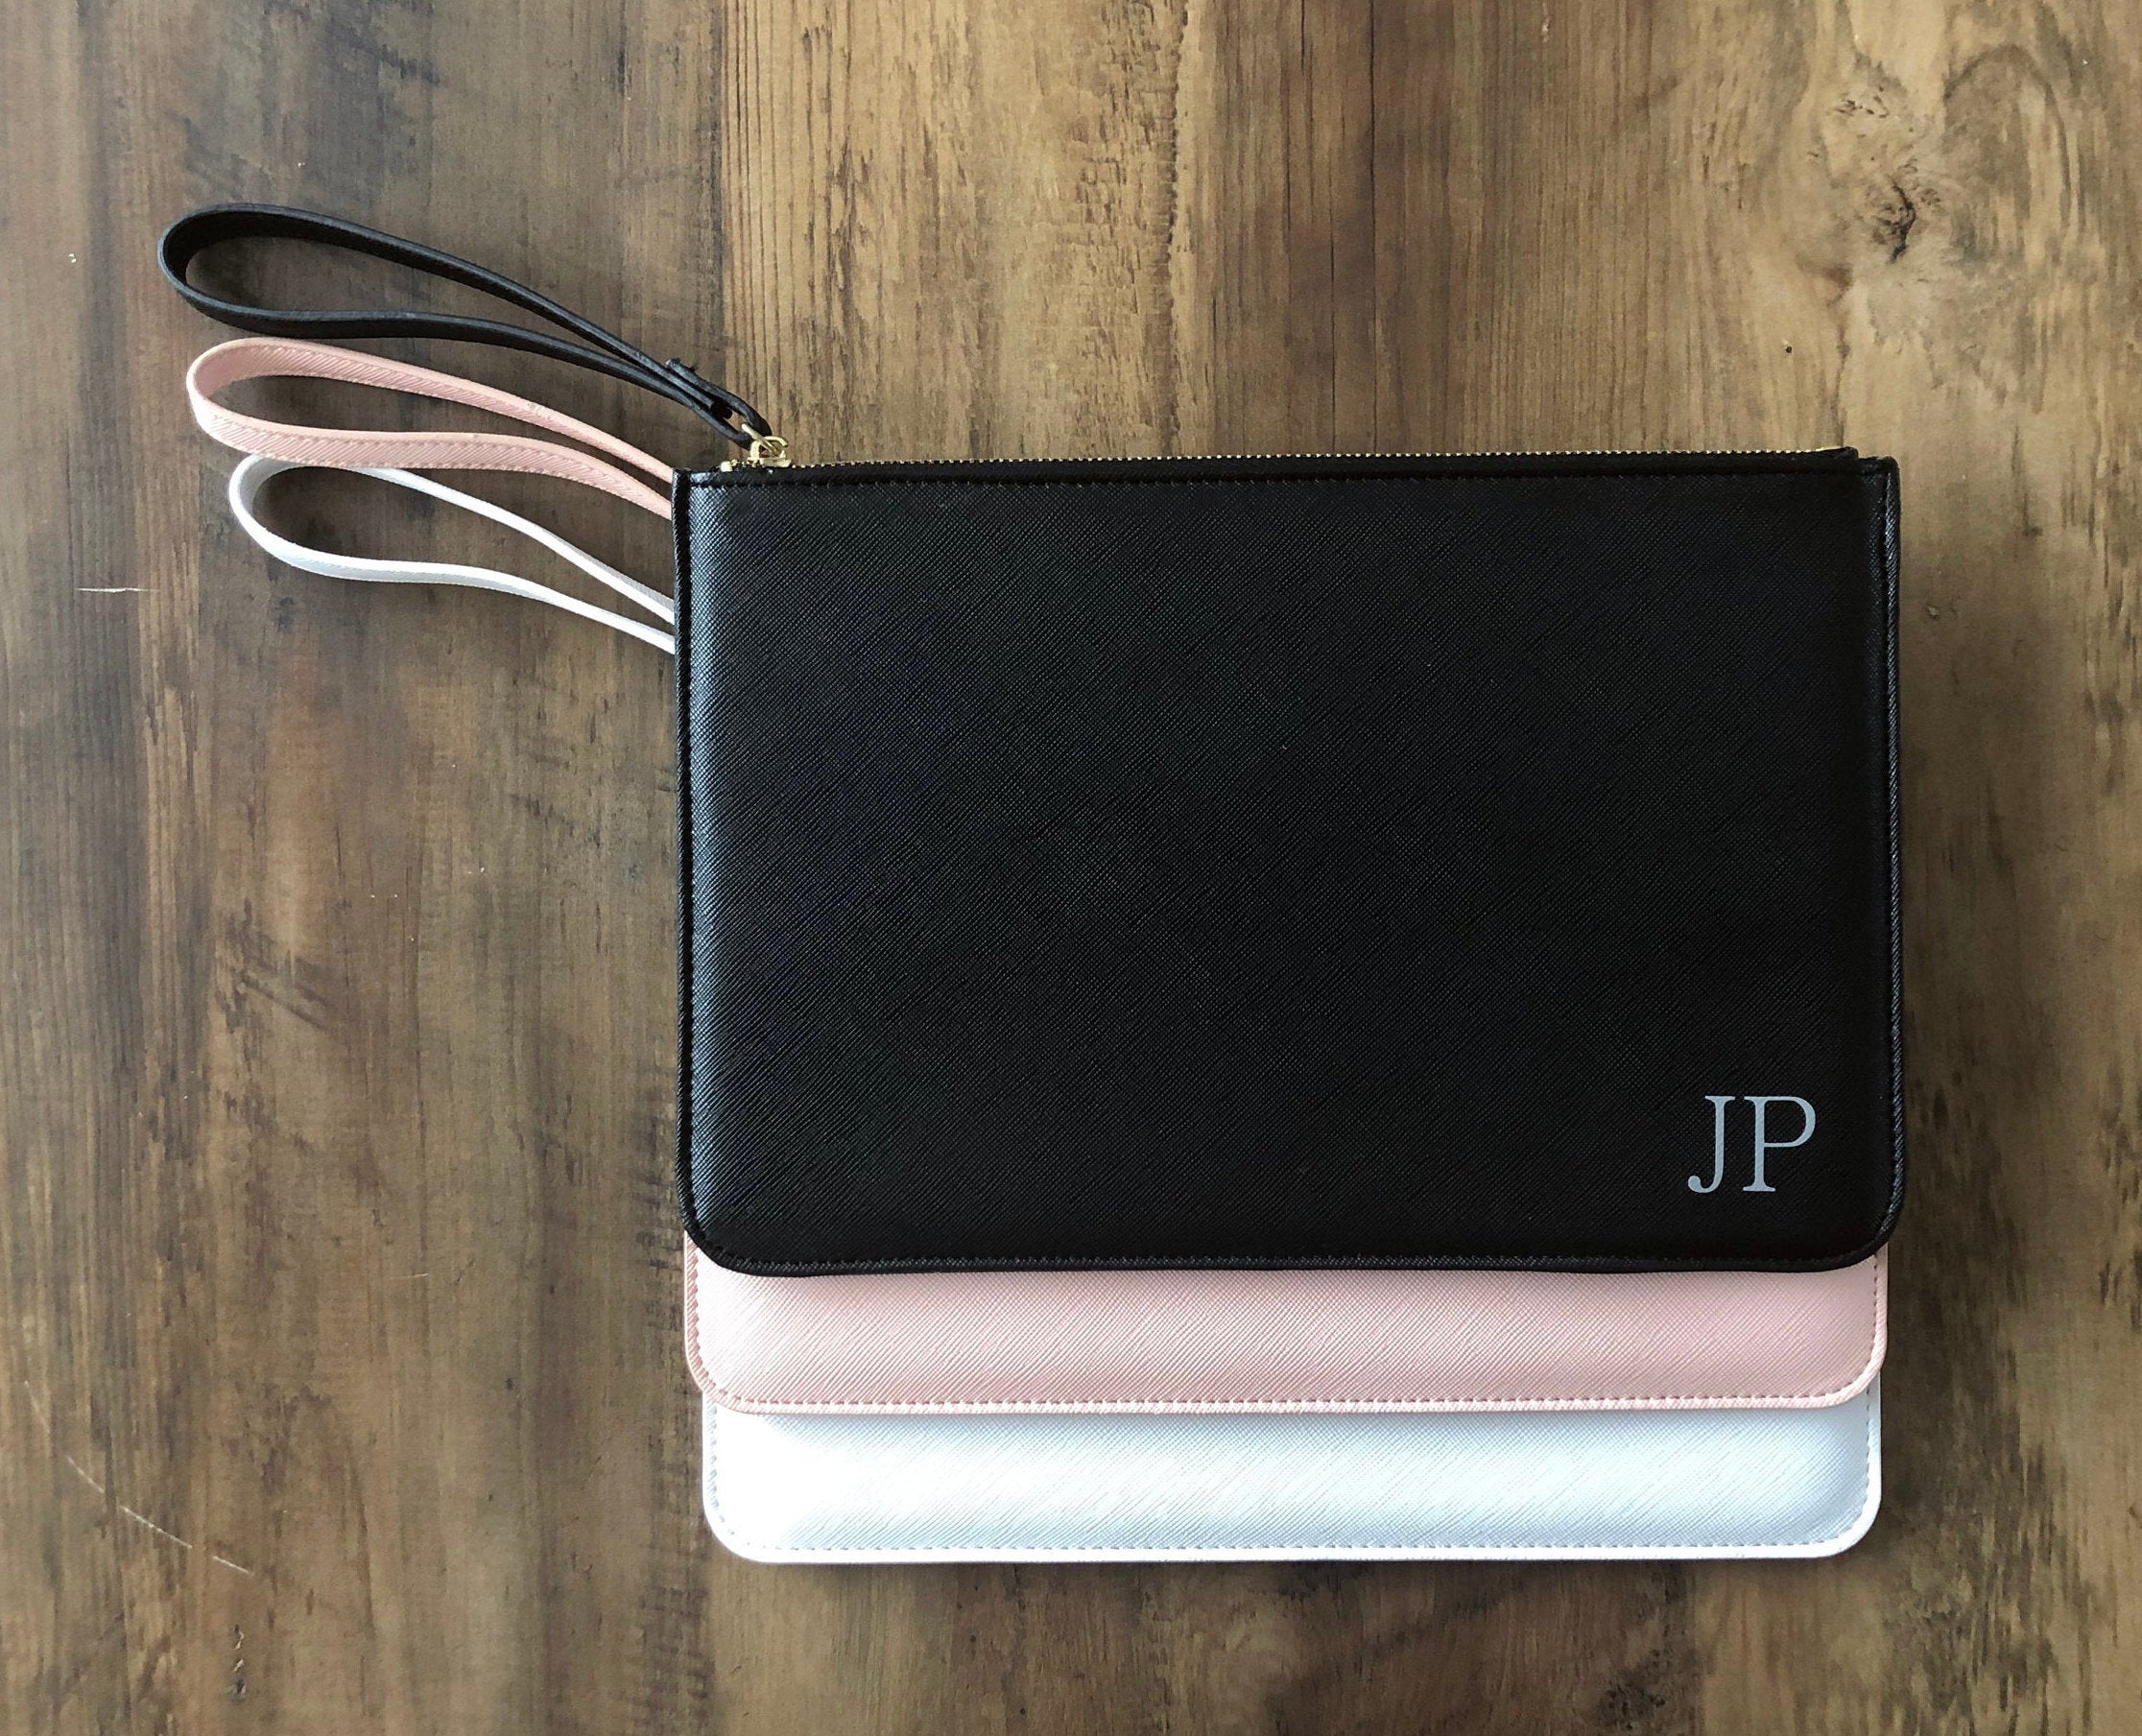 Personalised Initial Clutch Bag